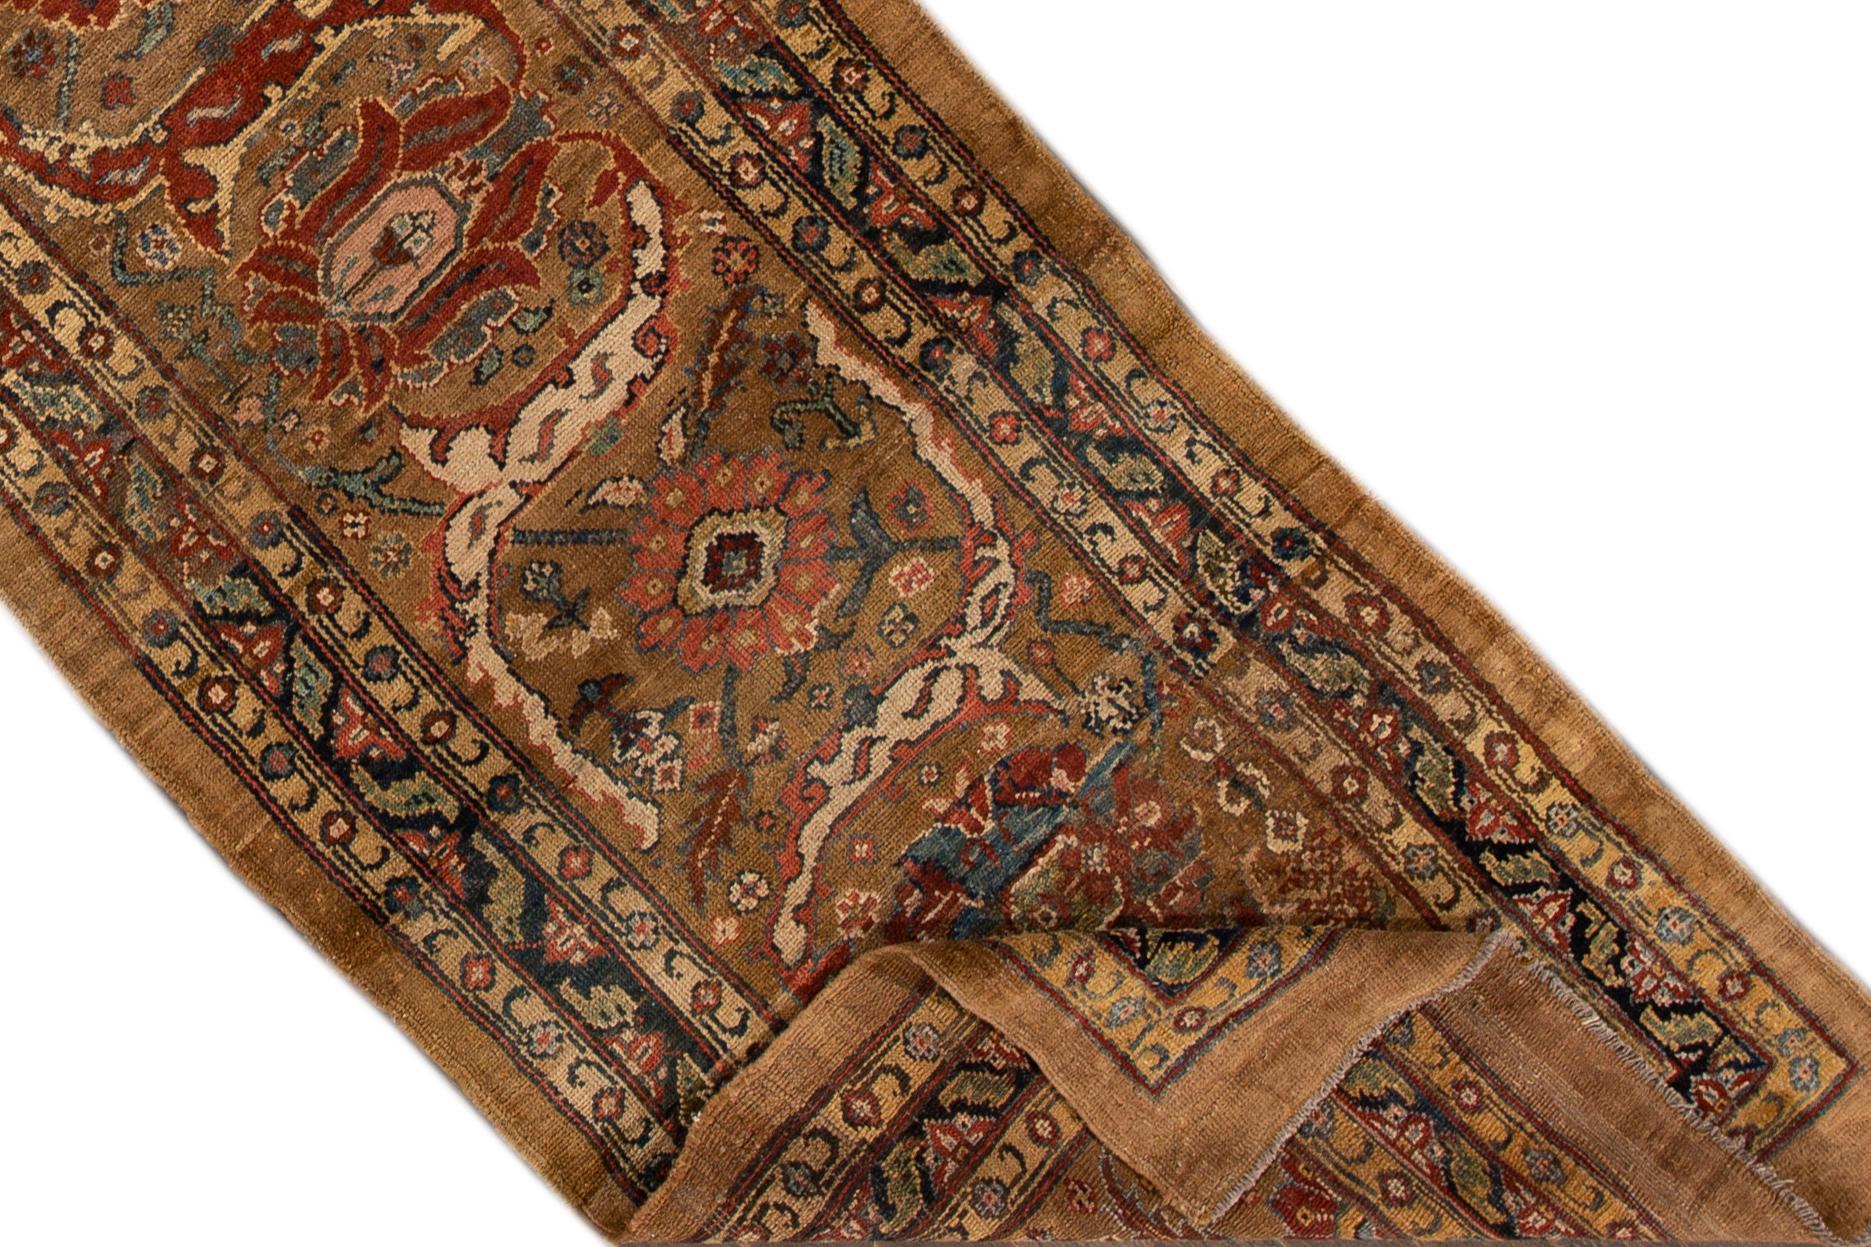 Beautiful vintage Bakshaish wool rug with a peach field, the fame of brown. This rug has multi-color accents in an all-over geometric design.

This rug measures 2' 11